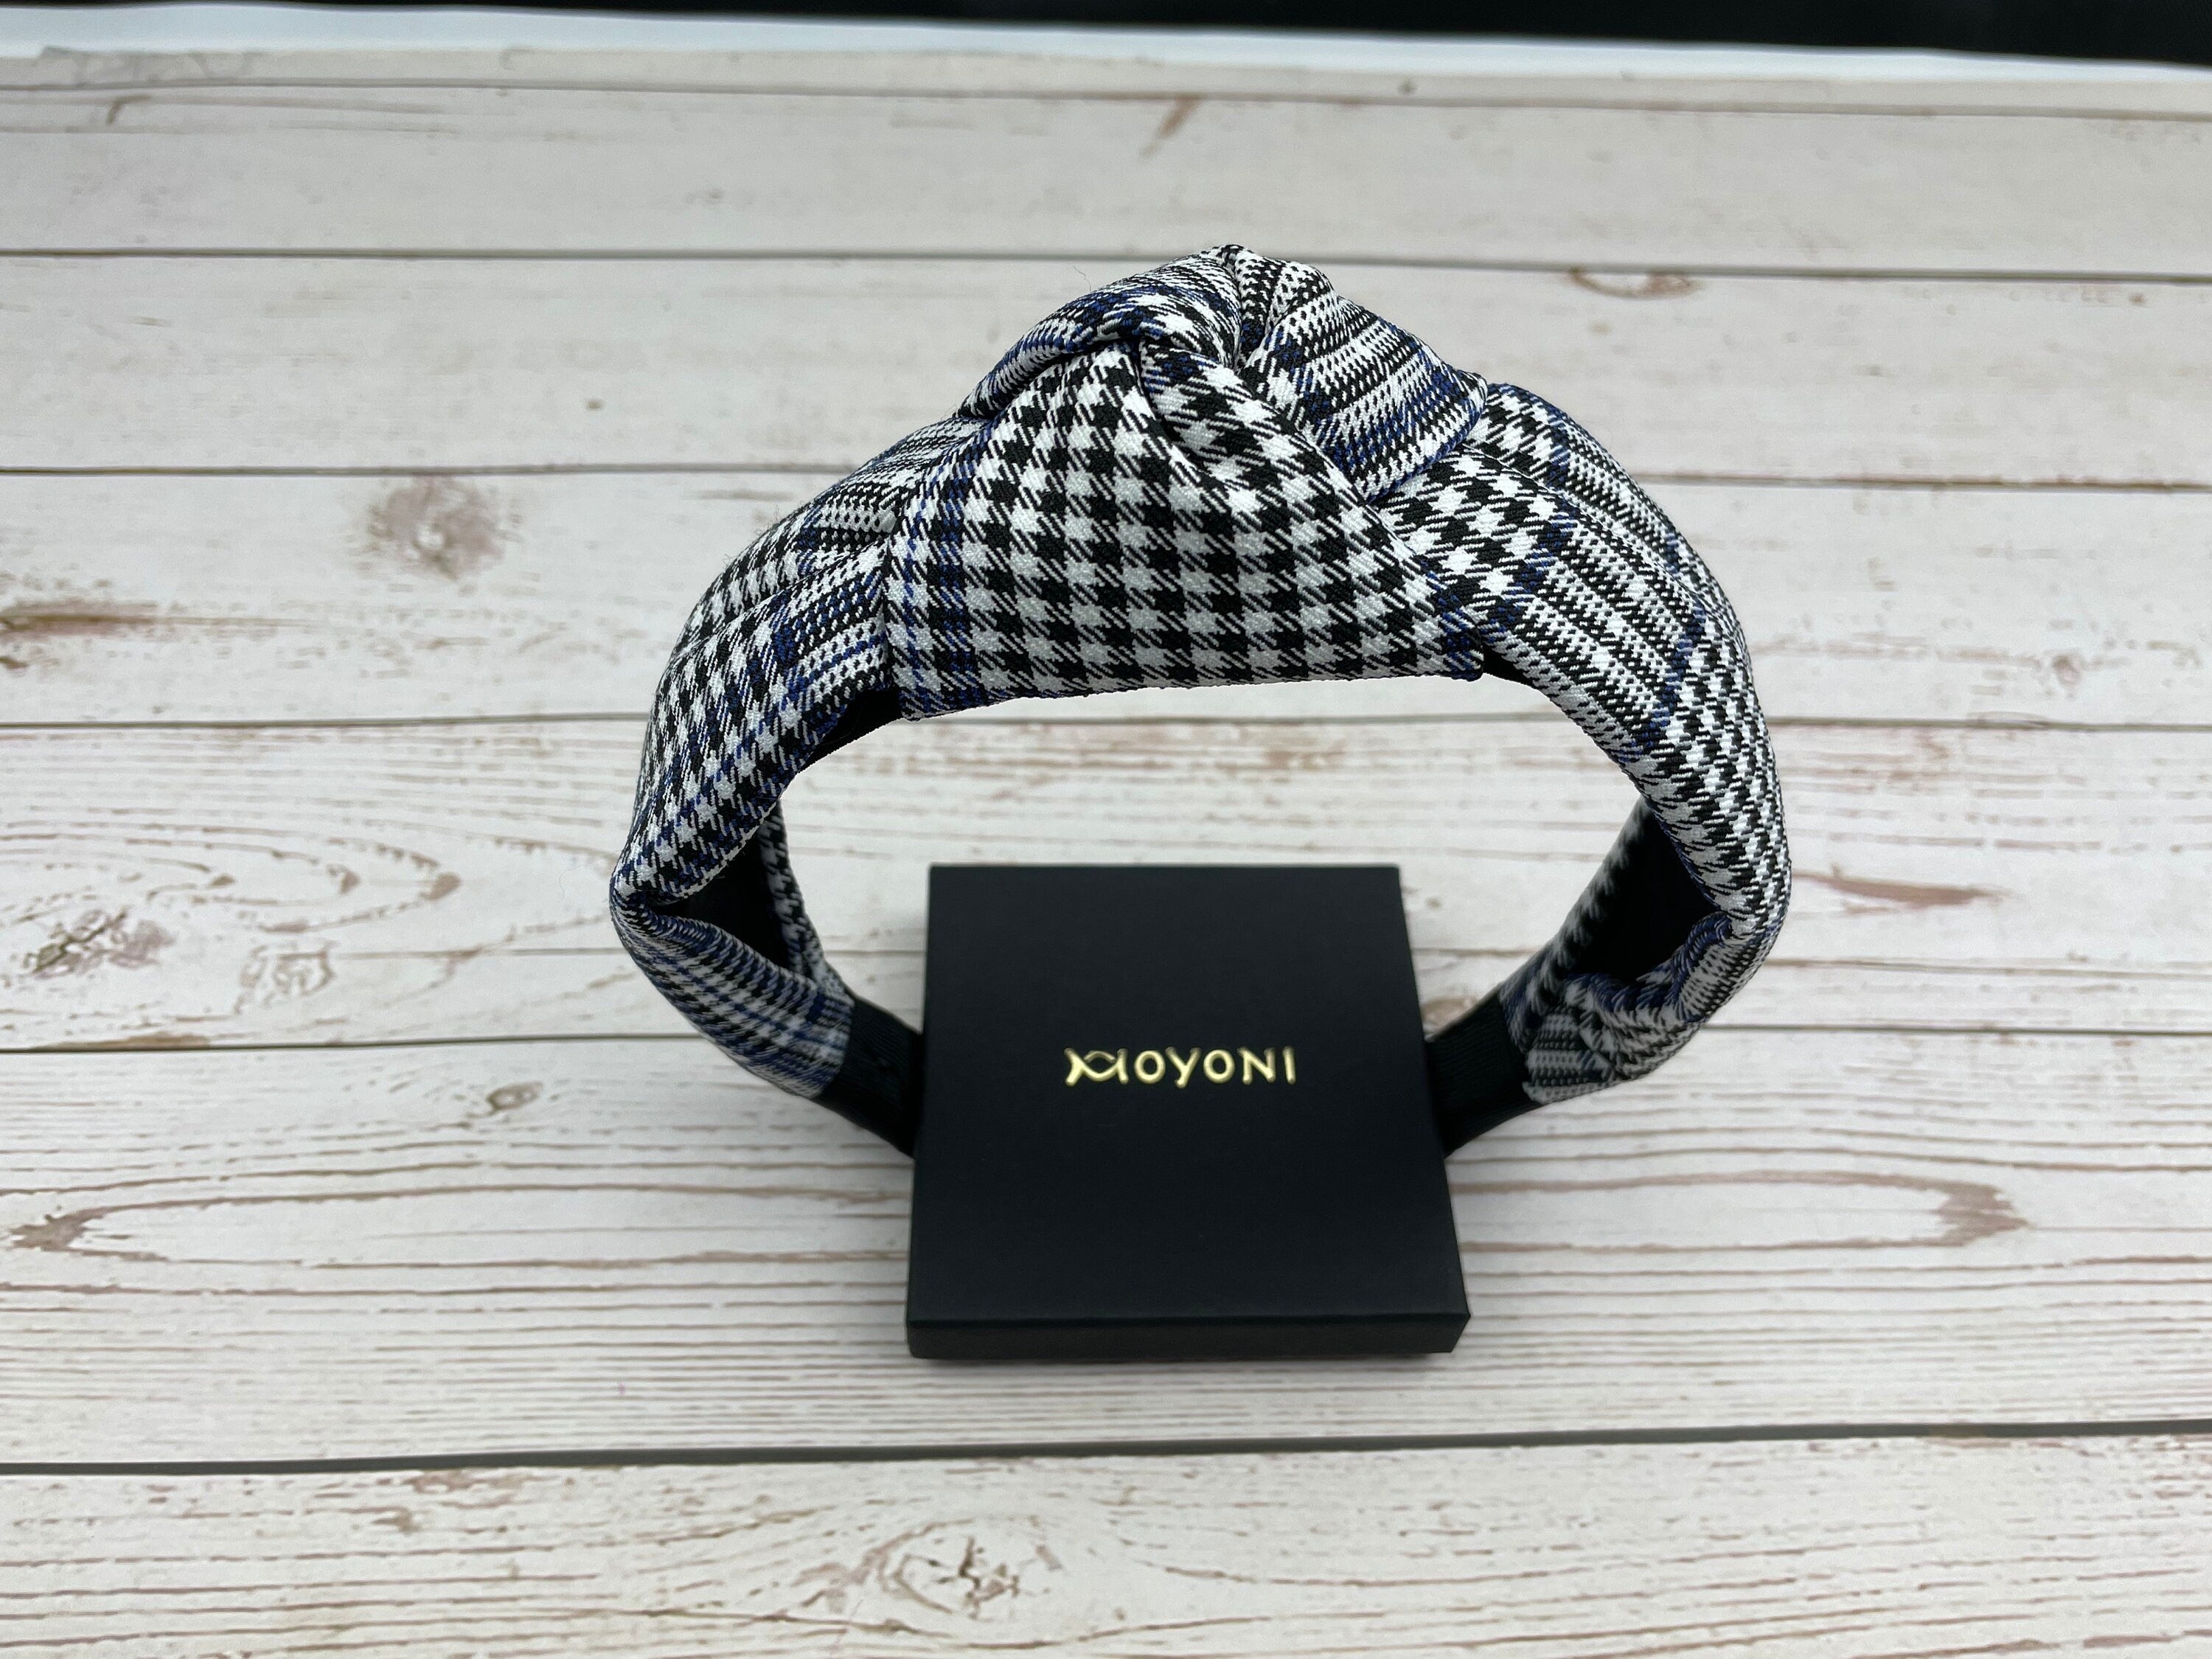 Whether it is casual or formal, this headband will make you stand out in the crowd. Made from high-quality materials, this headband will keep its shape for years to come. lightweight design makes it easy to wear and remove.